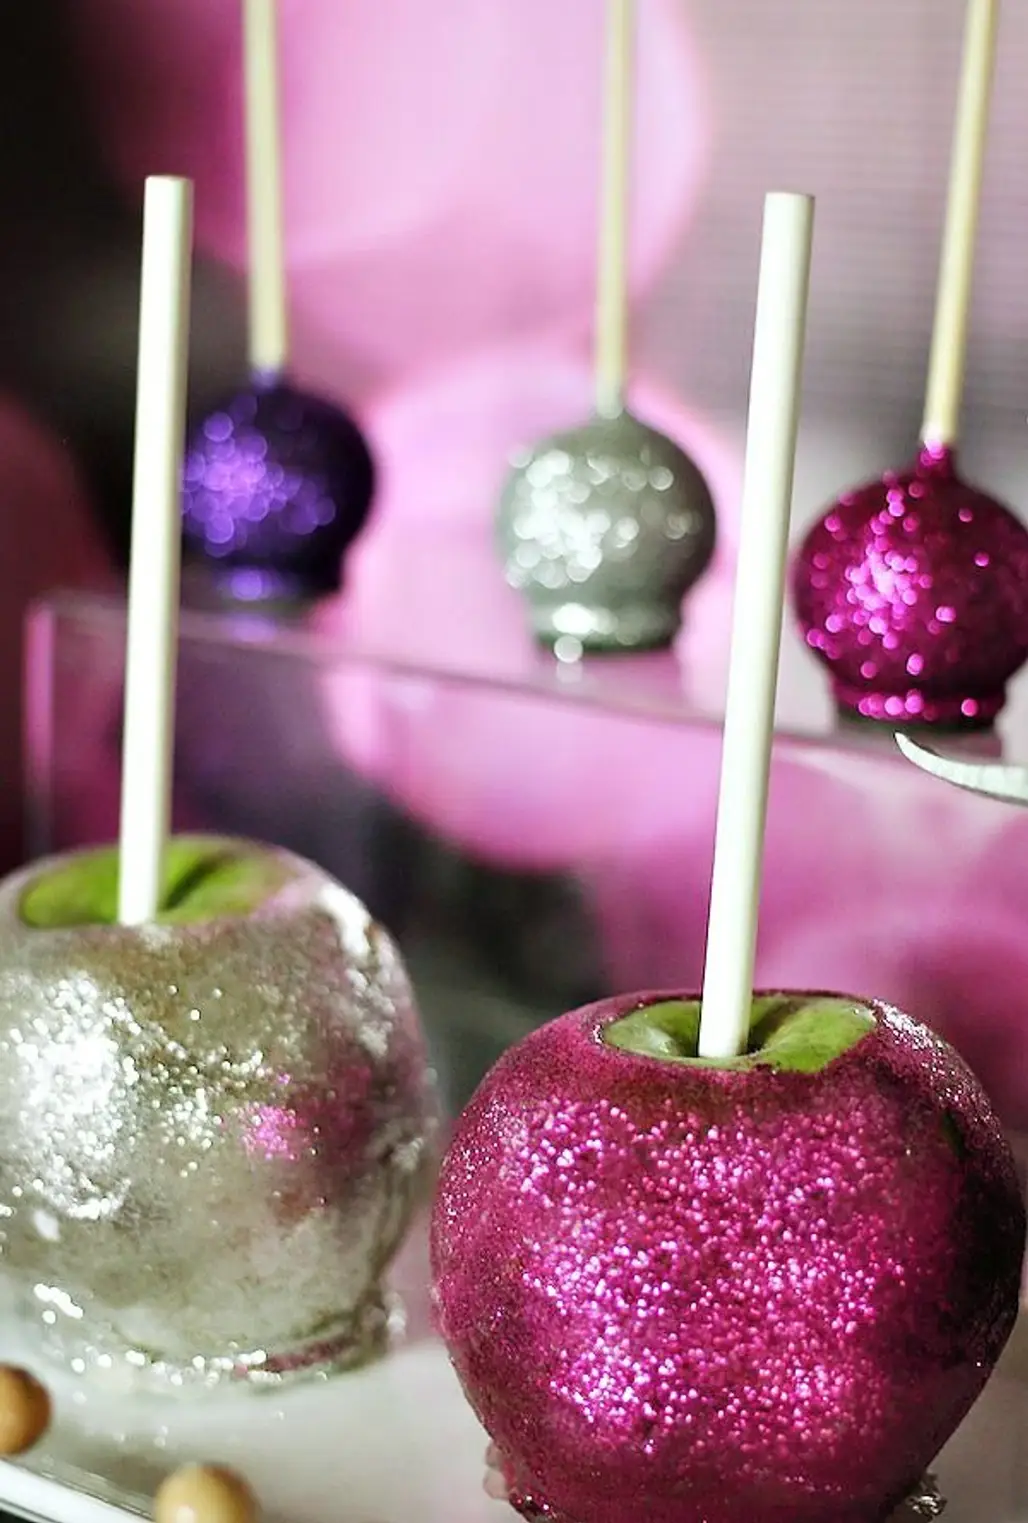 Edible Glitter Chocolate Covered Apples